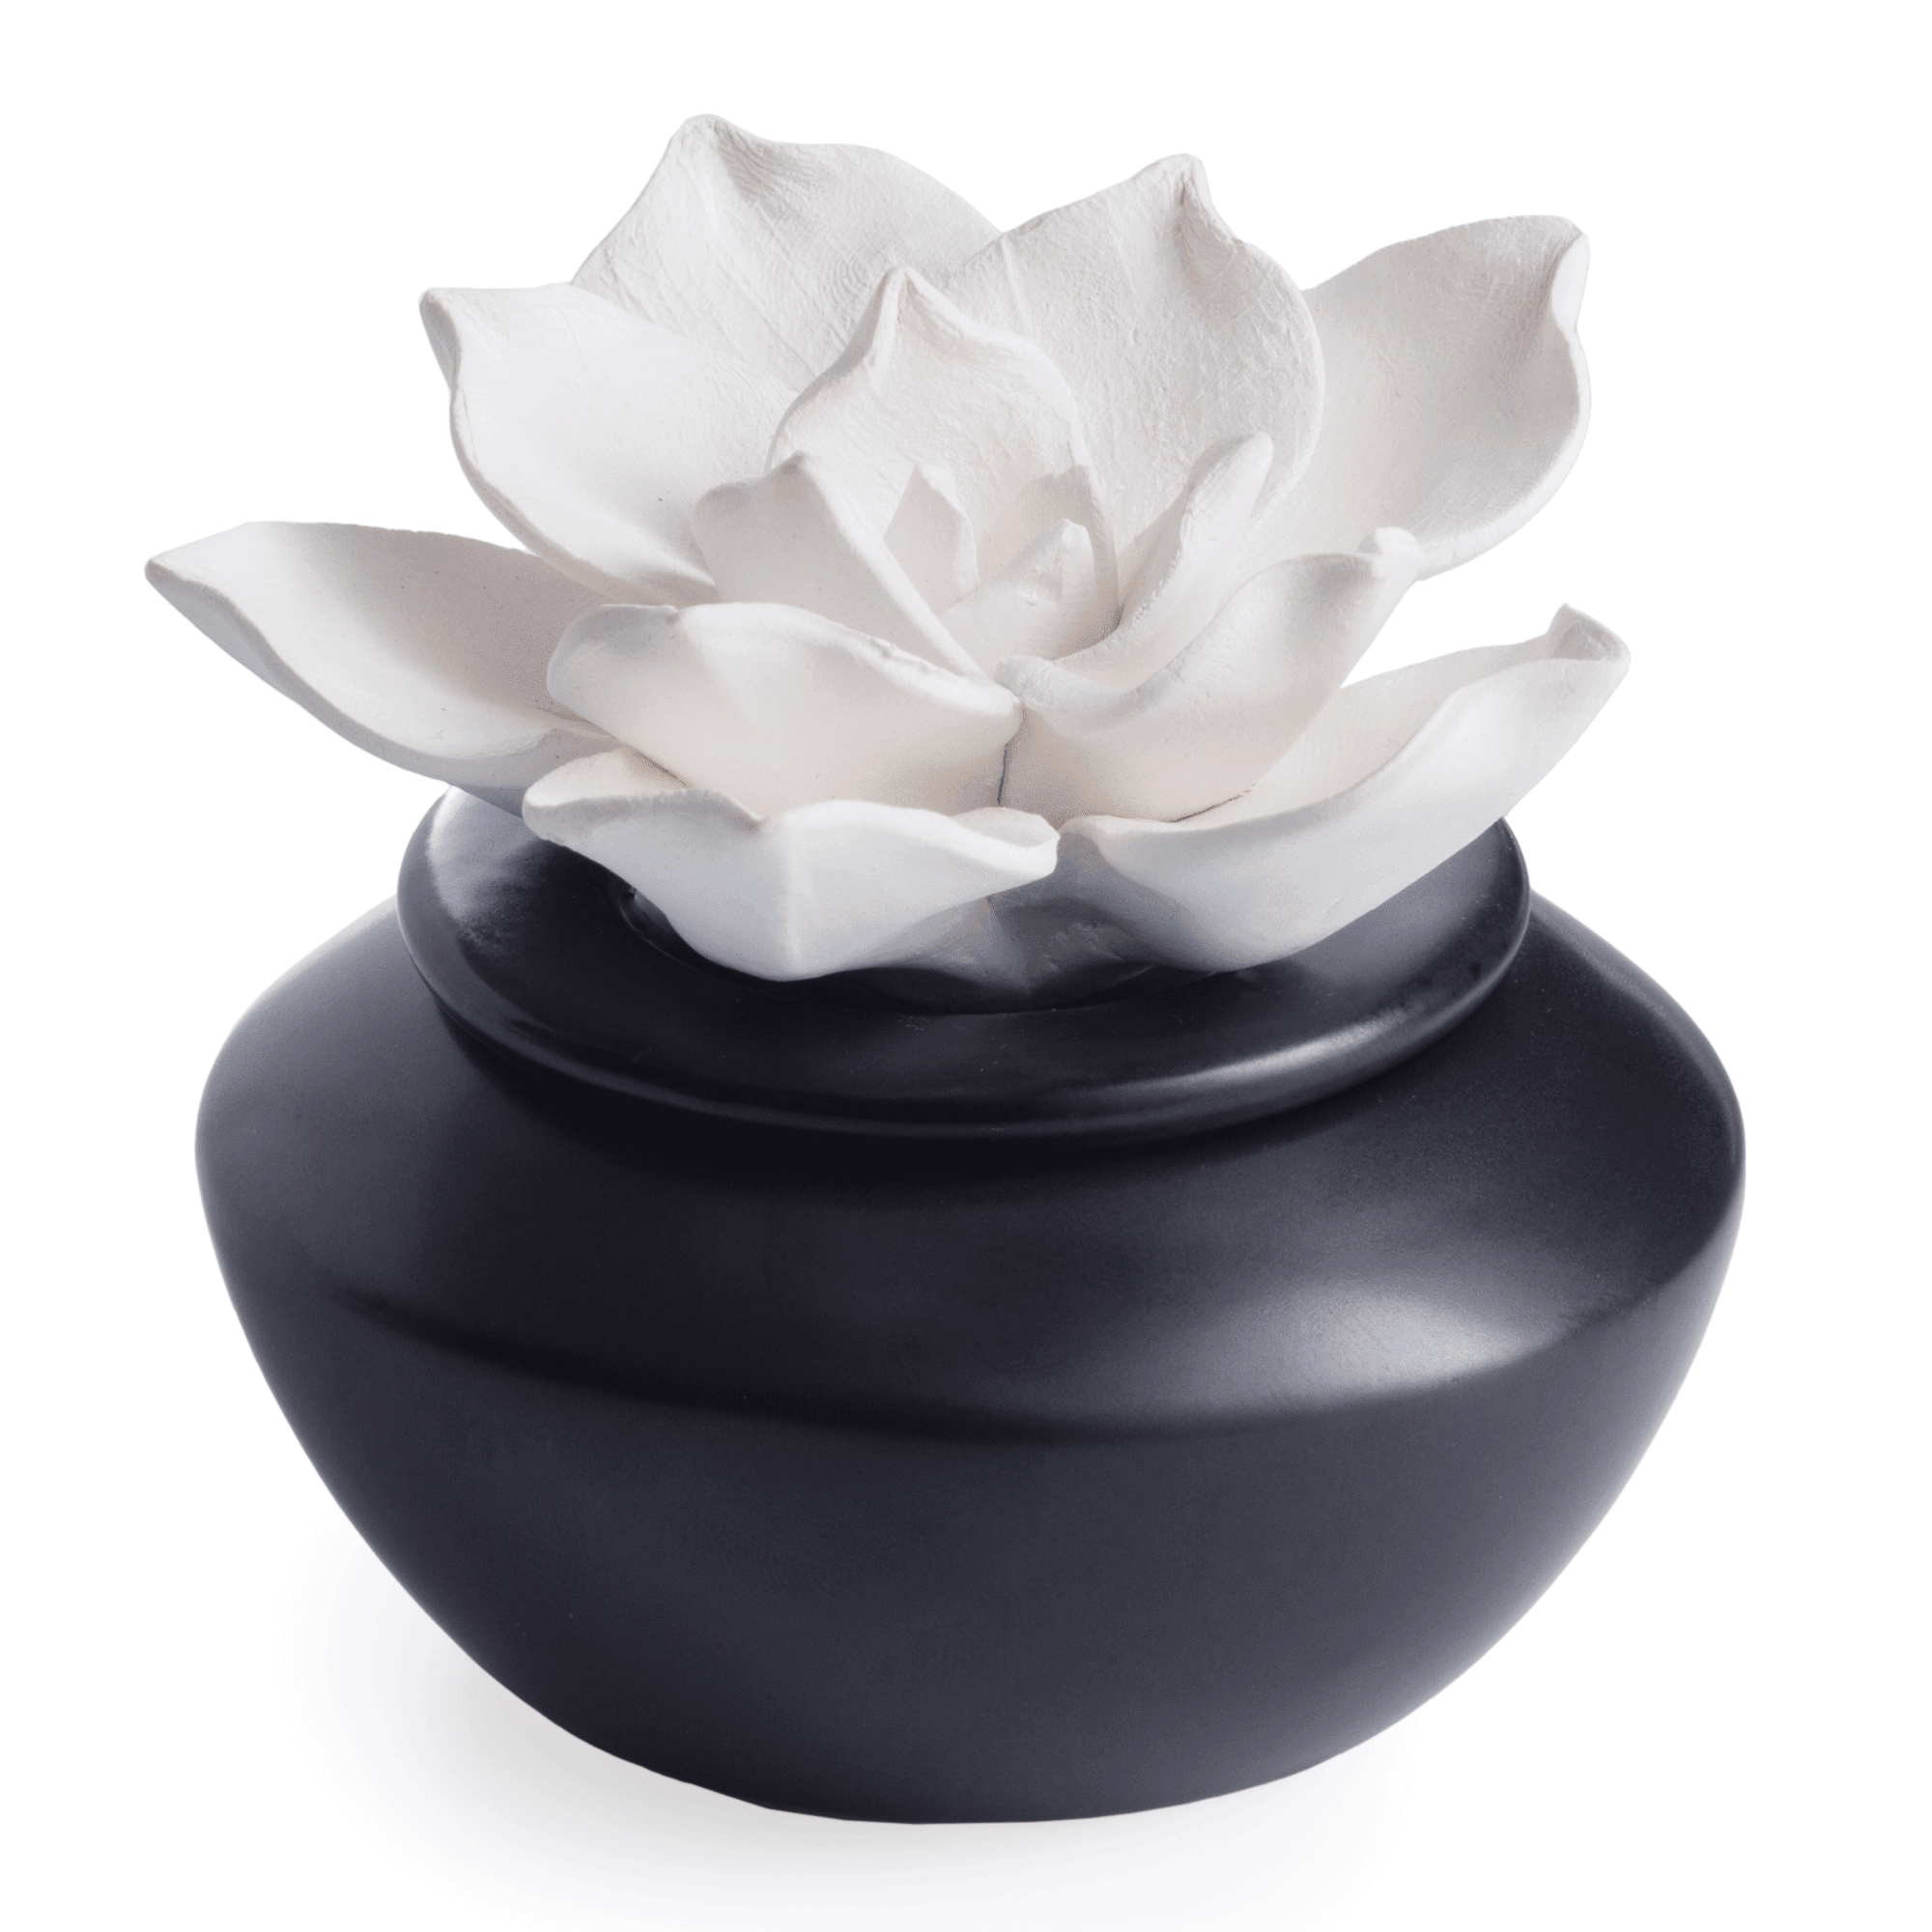 Botanical Porcelain Gardenia Electric Diffuser with Peppermint Oil